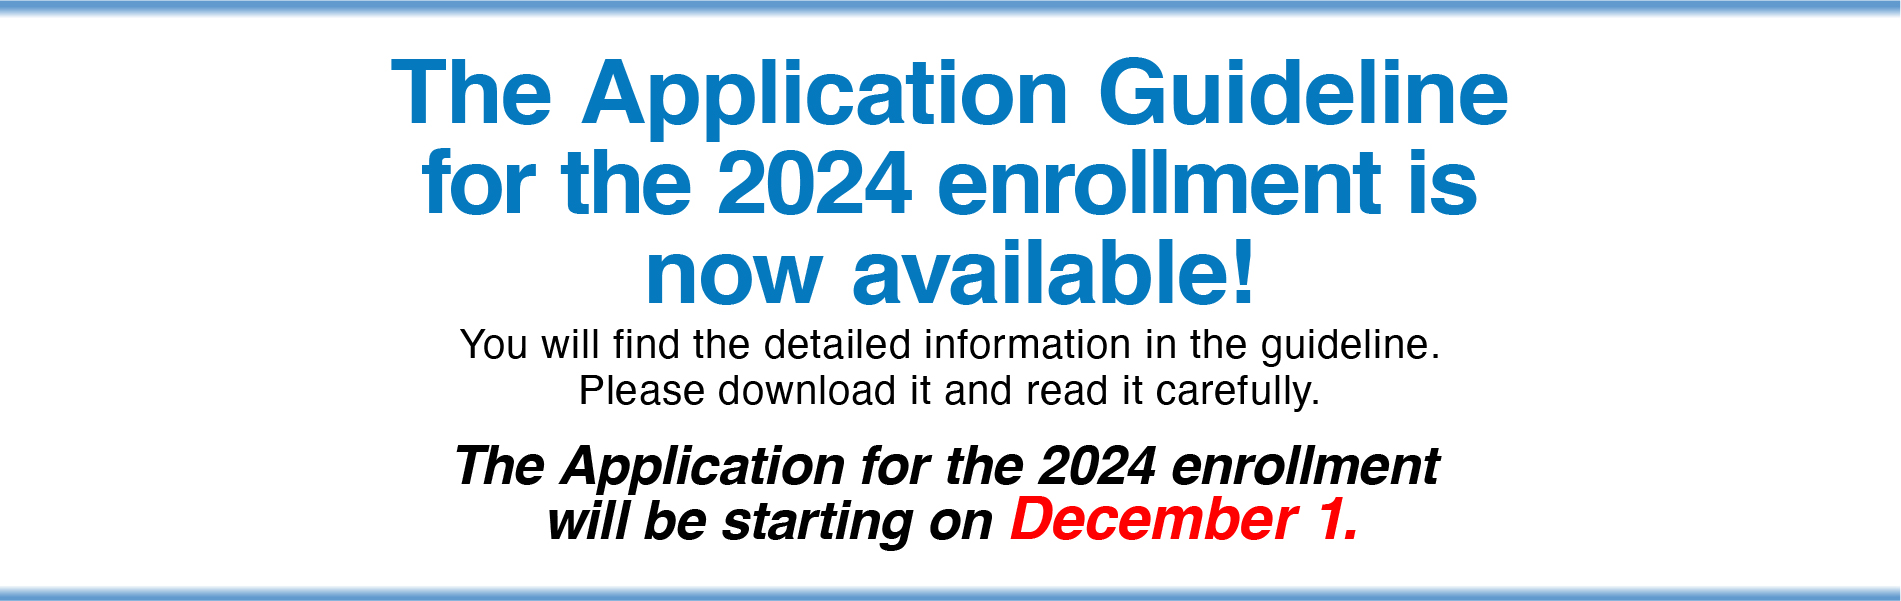 The Application Guideline for the 2024 enrollment is now available!